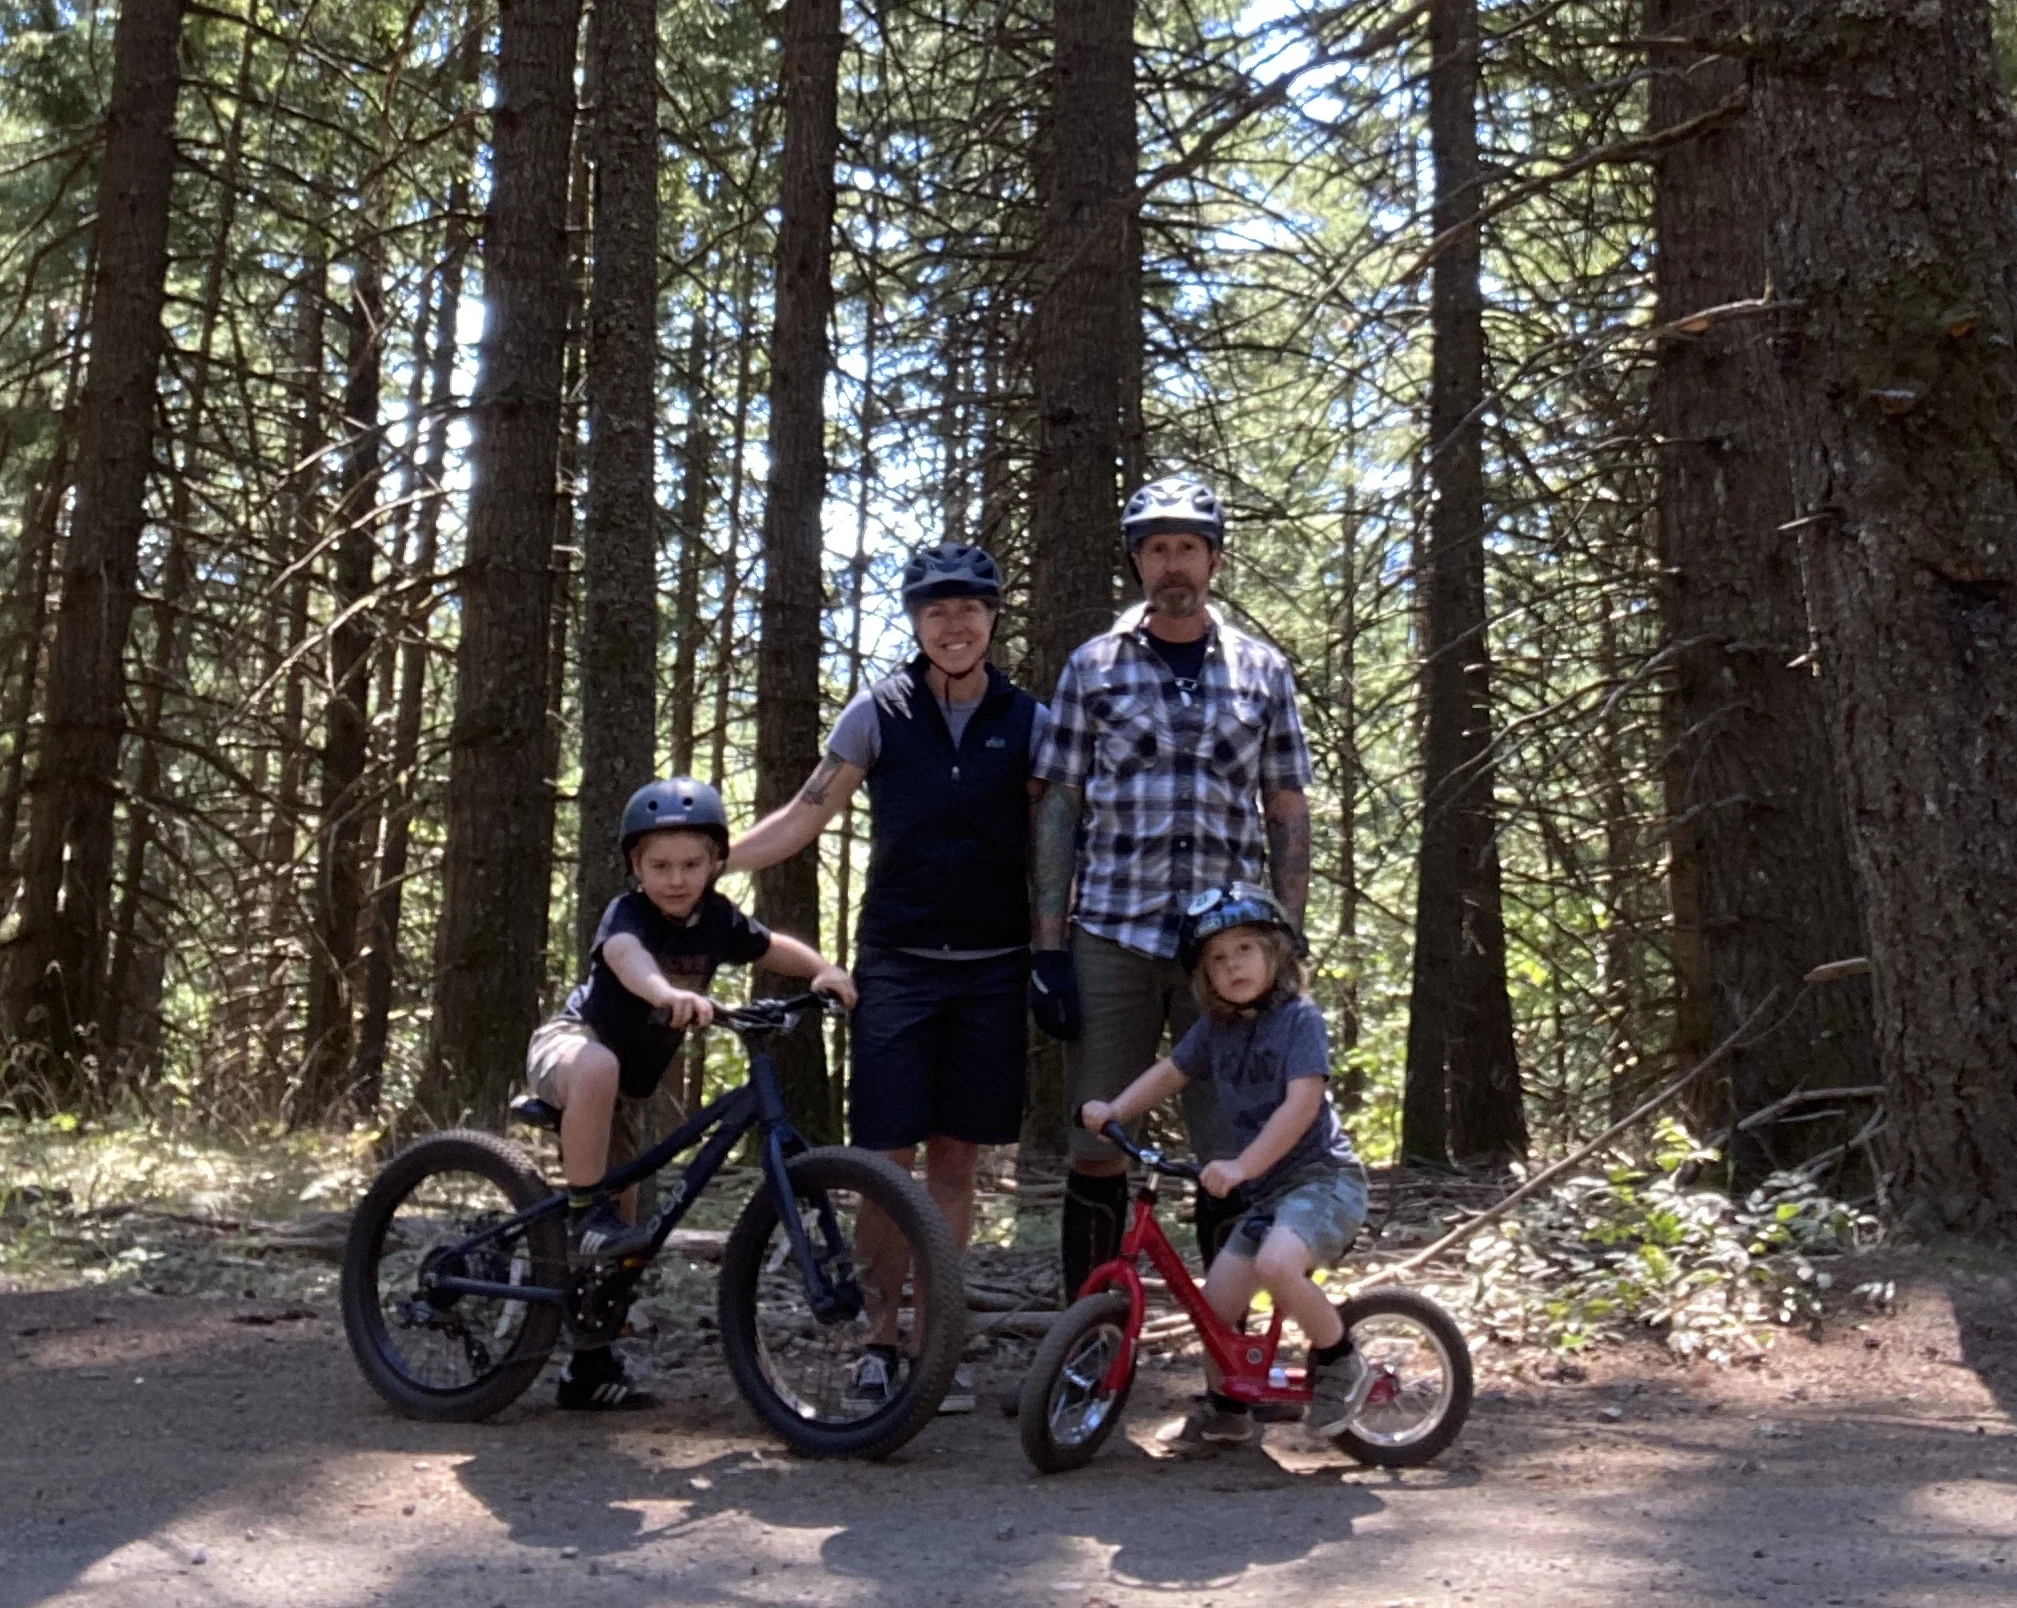 family biking together in the woods